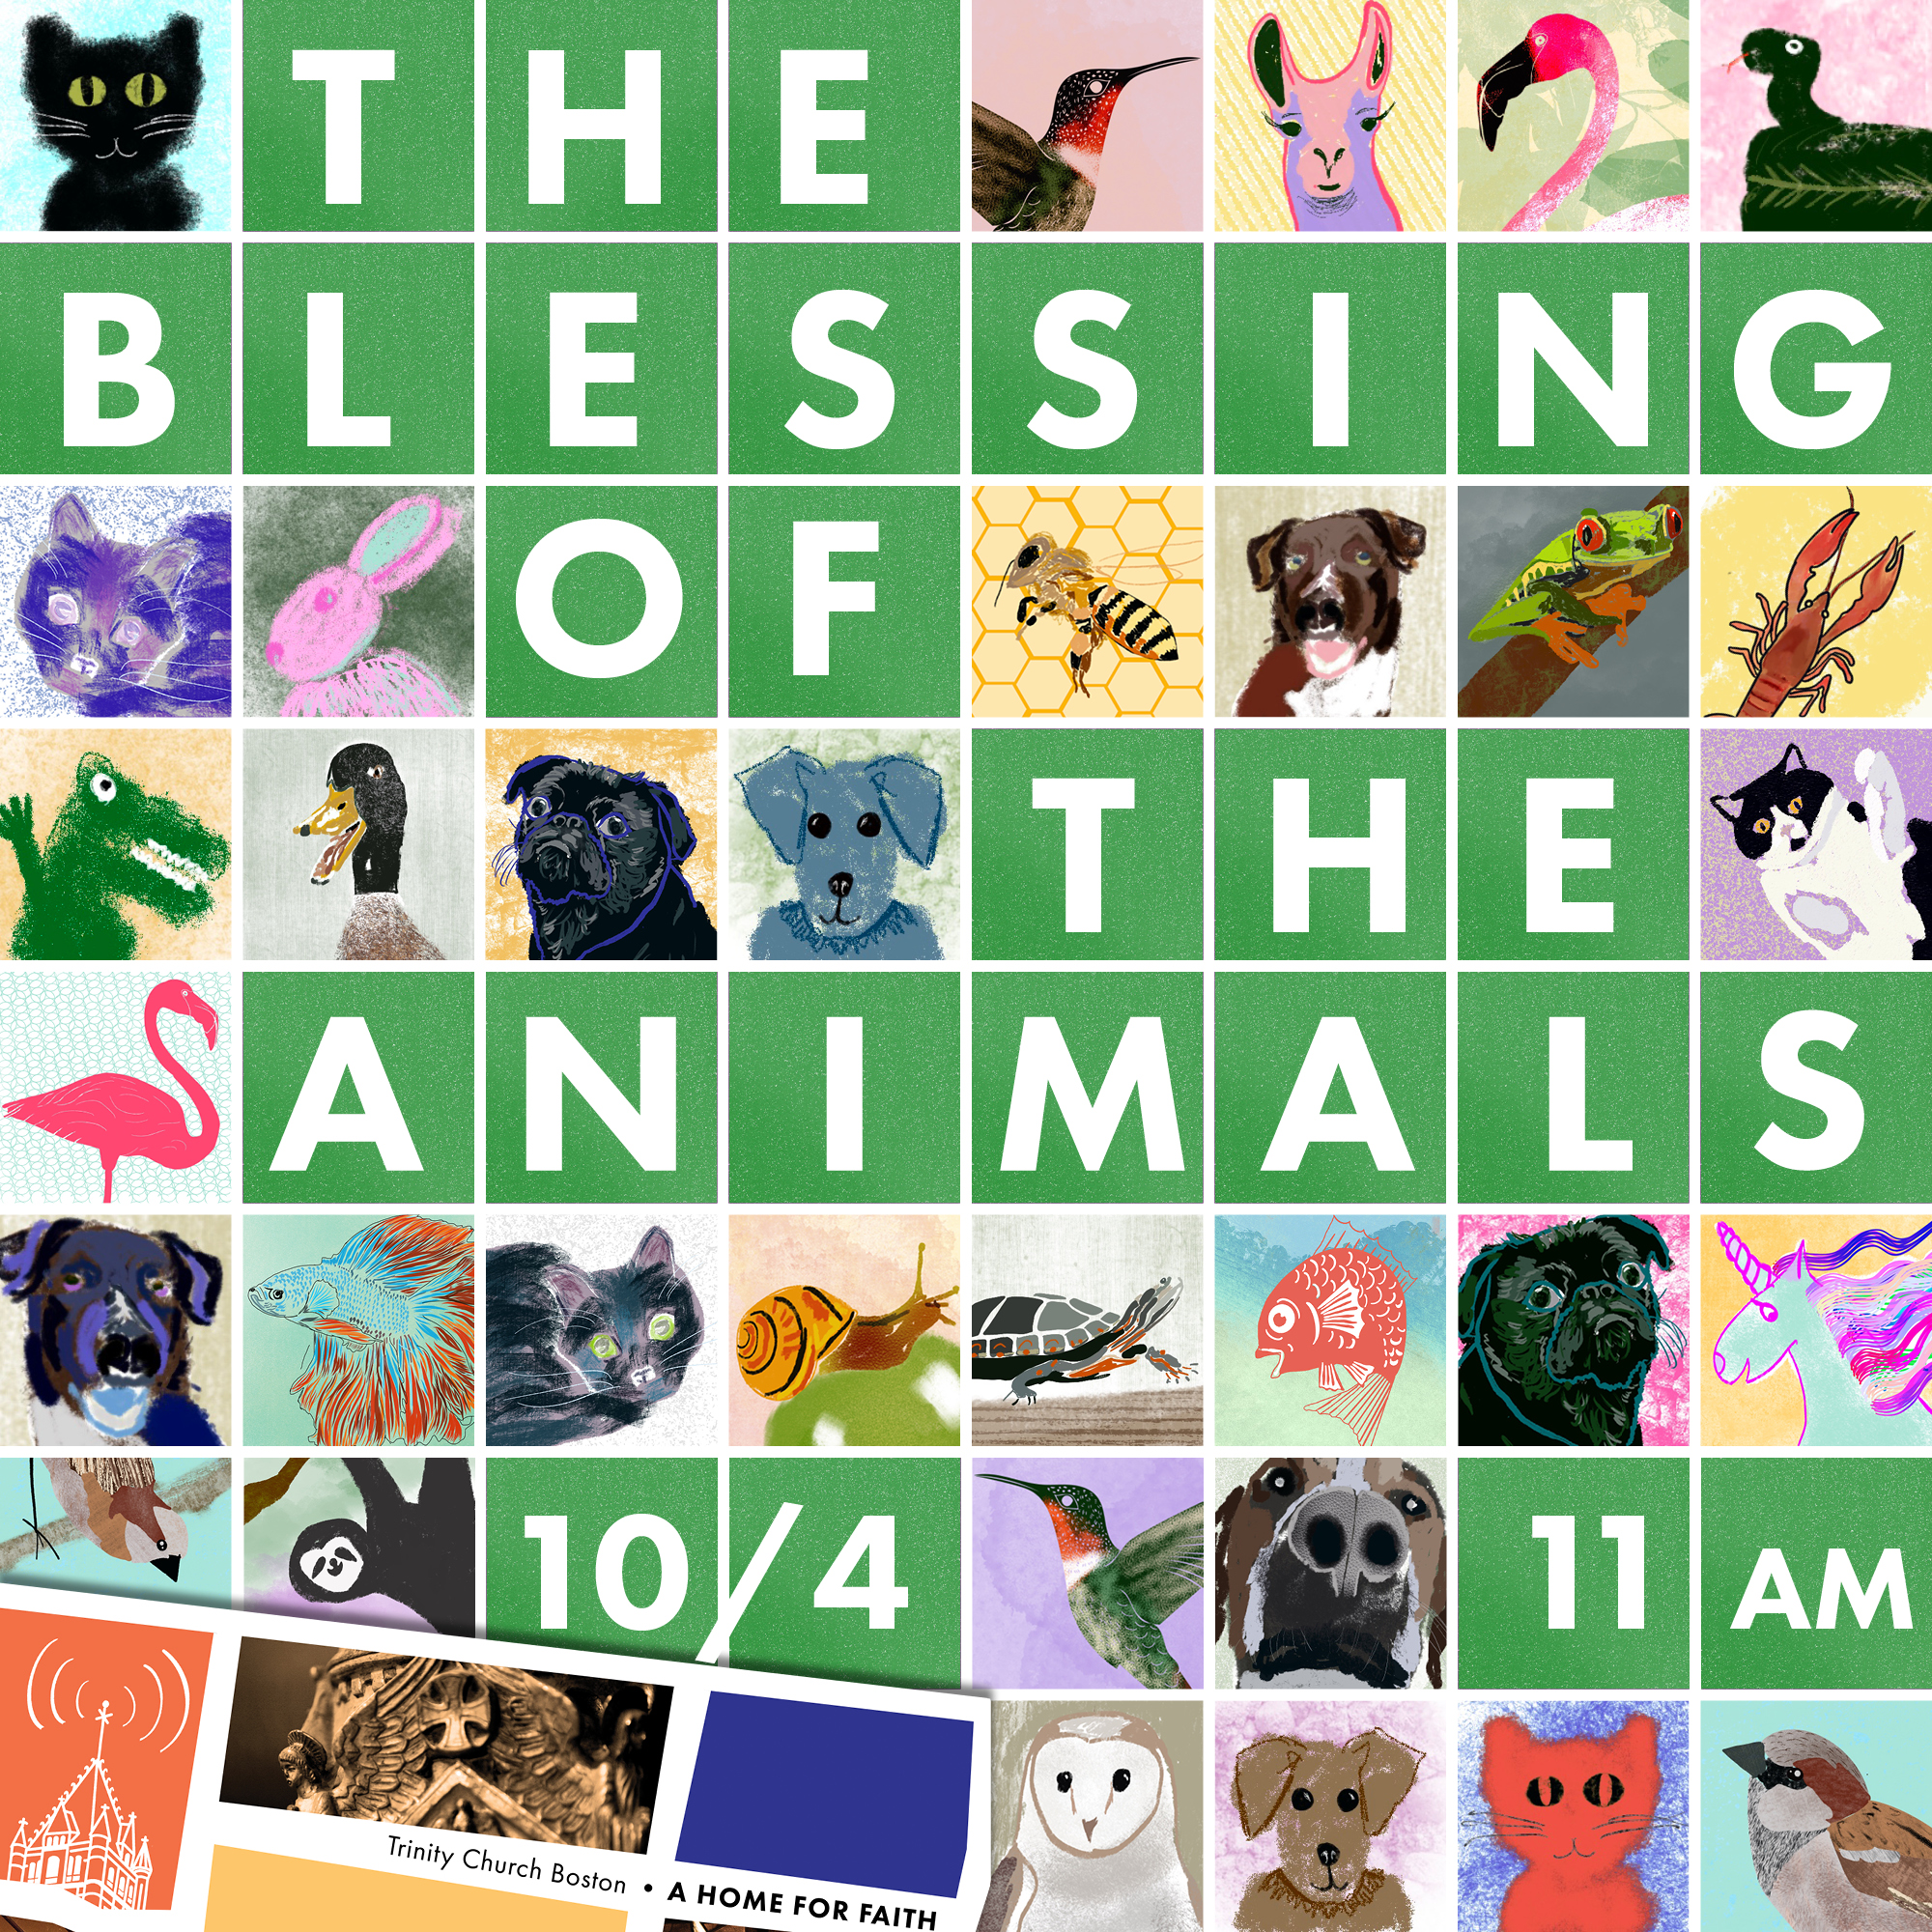 Join us for The Blessing of the Animals on Zoom at 11 am on Sun., 10/4. Image is an 8x4 grid with 'Blessing of the Animals' text and hand-drawn images of cats, dogs, birds, and other animals, including a llama, bunny, unicorn, honeybee, frog, turtle, sloth, and a snail. 